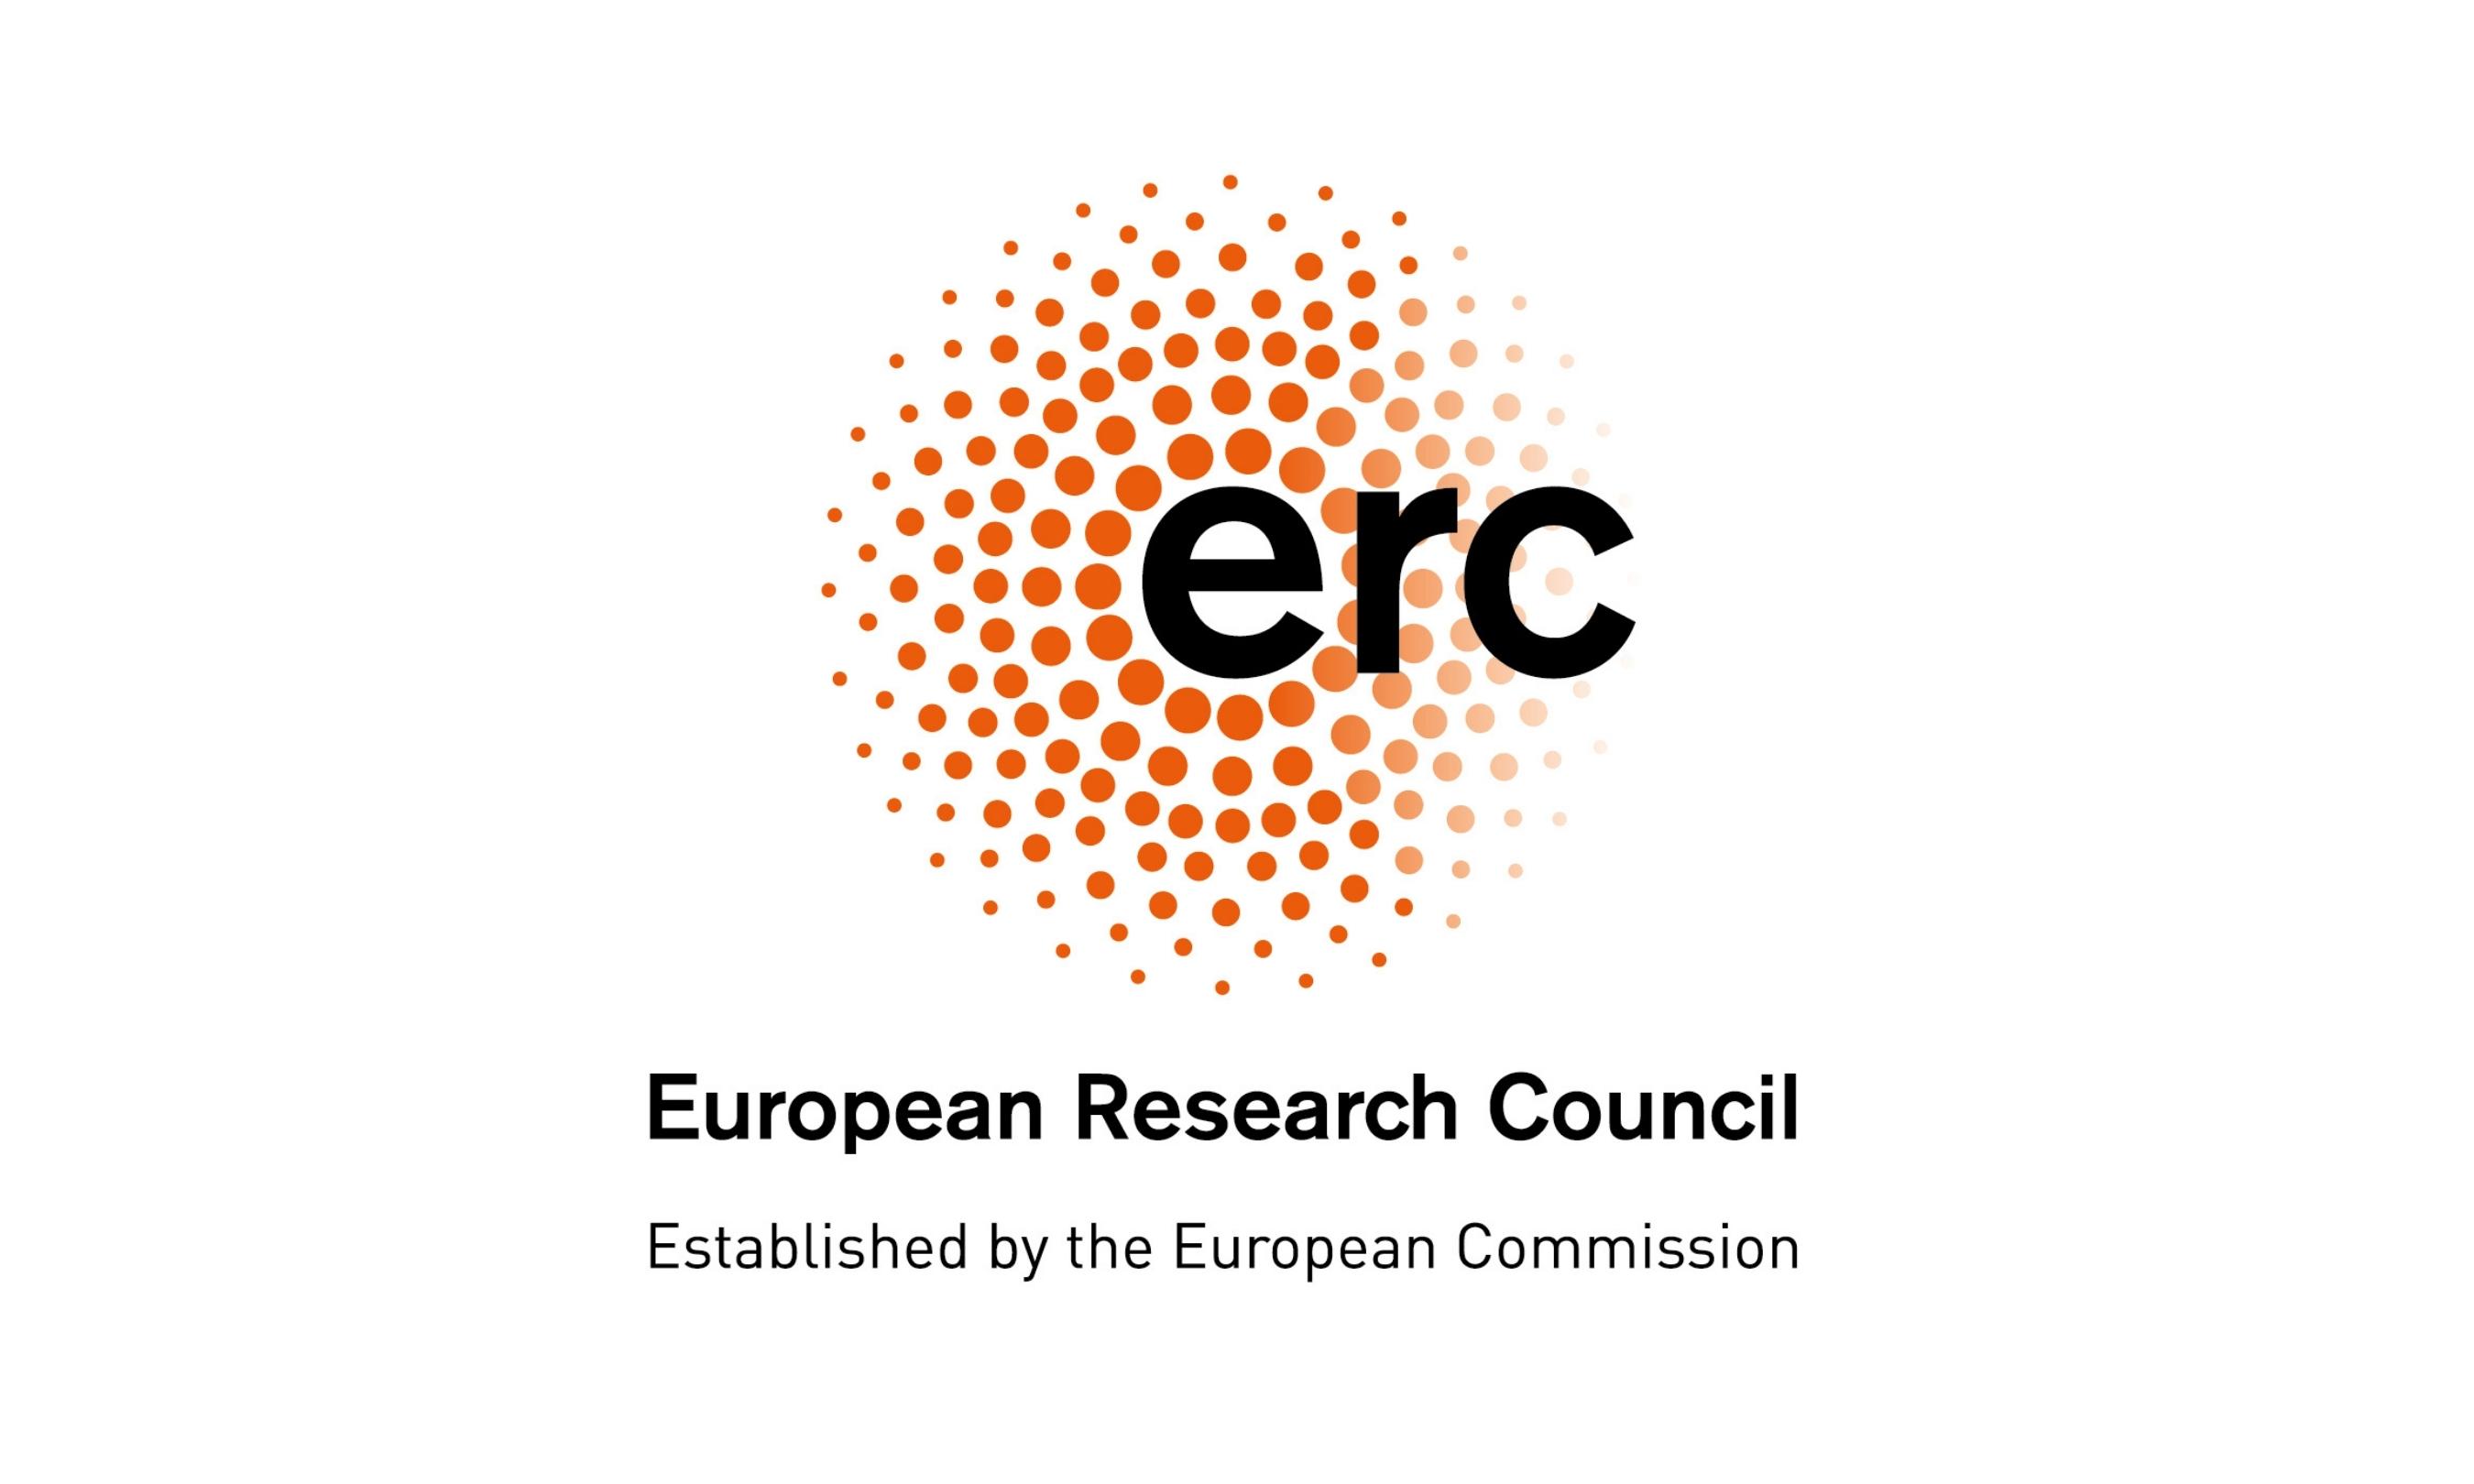 Cover image of ERC plan for 2018: nearly €2 billion investment in top researchers in Europe